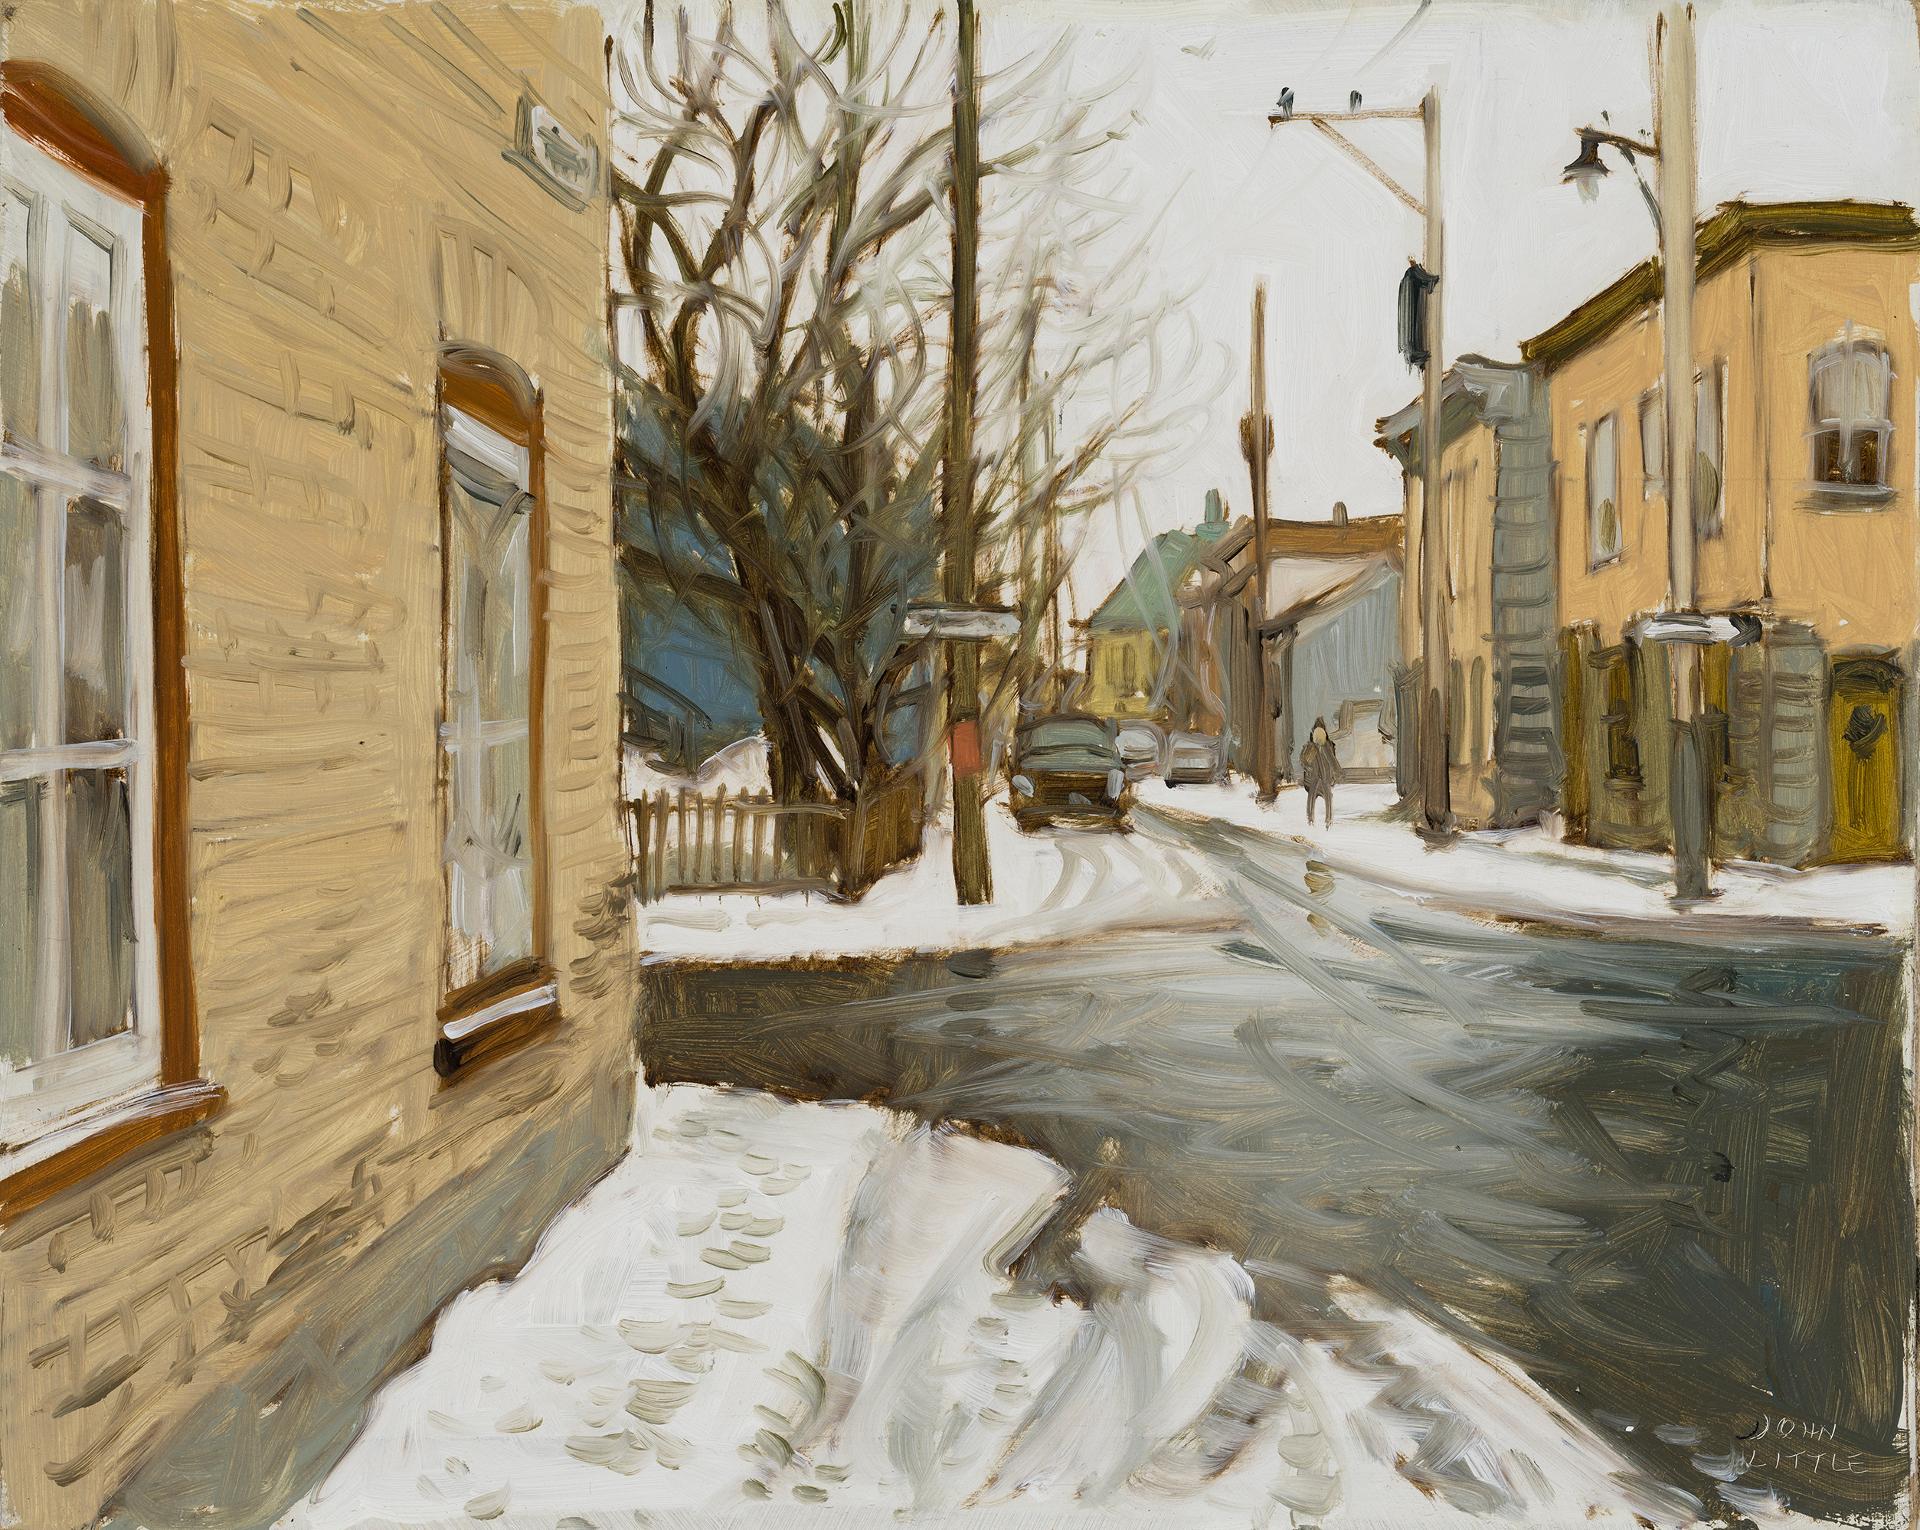 John Geoffrey Caruthers Little (1928-1984) - St-Ignace Street at St-Sauveur, Québec, PQ (with Eglise St-Malo at the end of the street), 1999